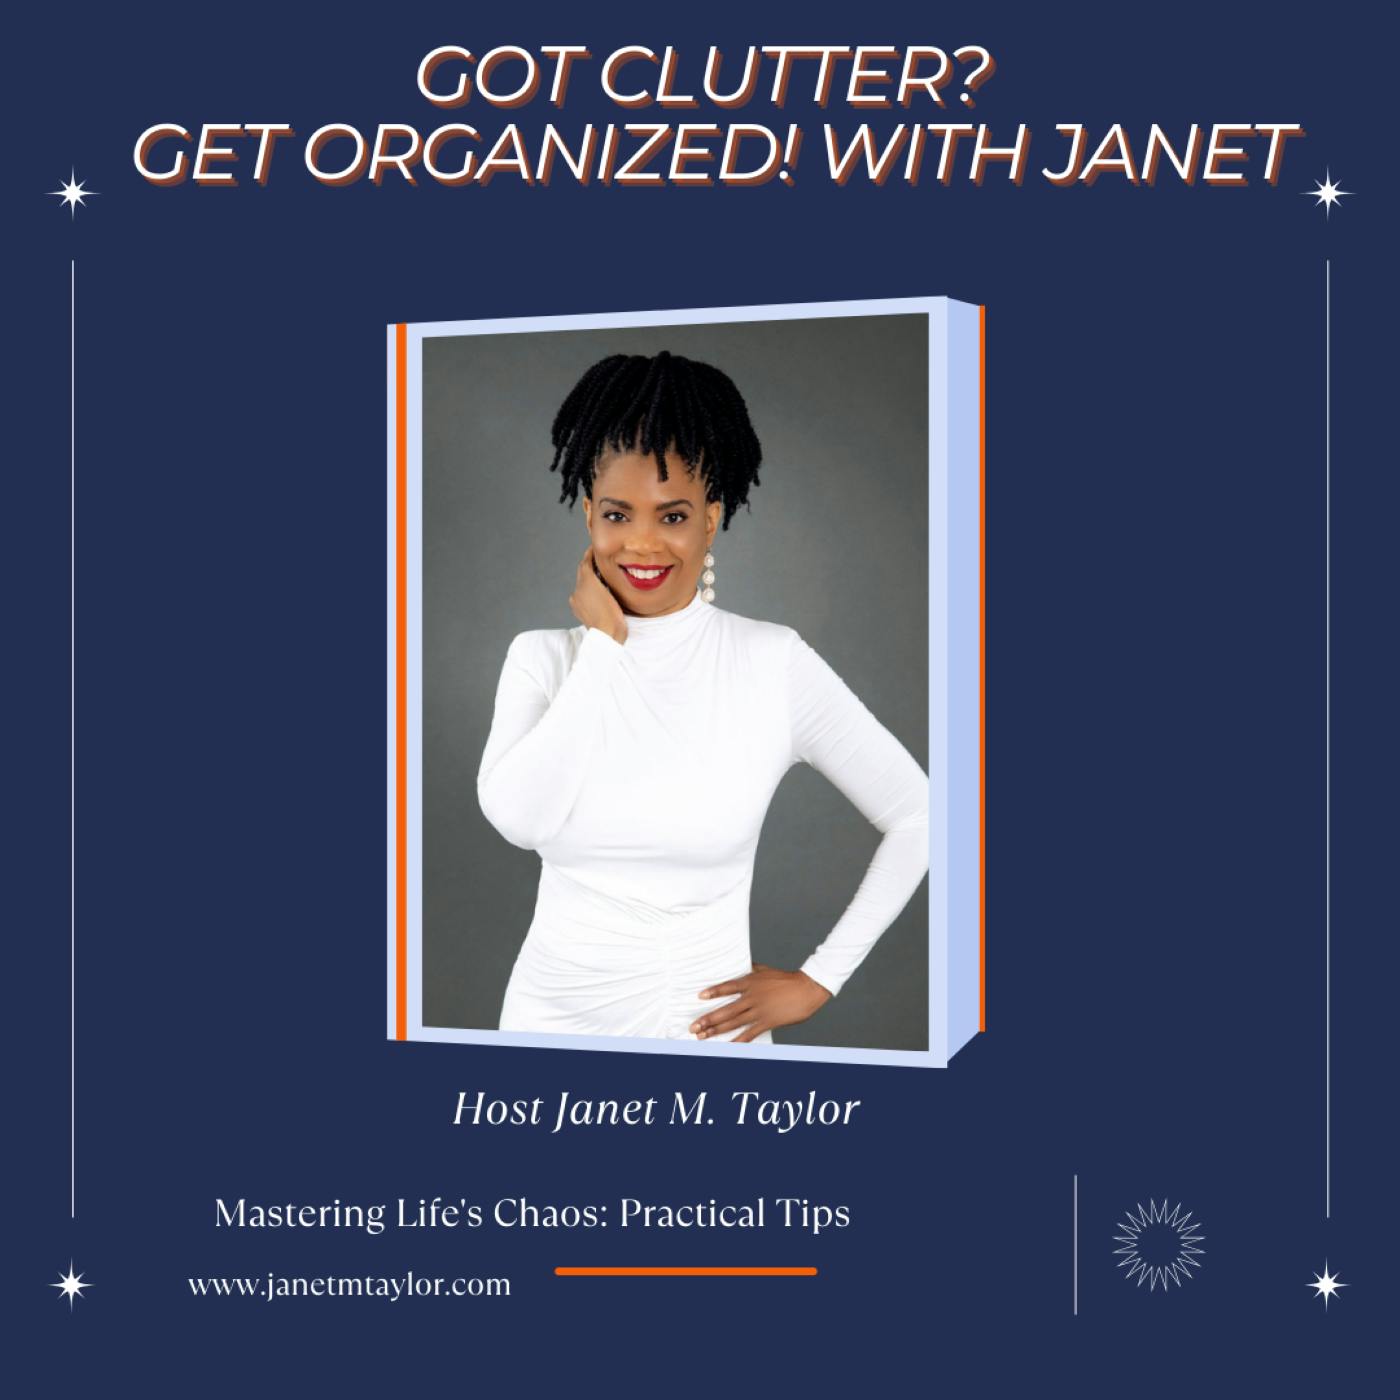 Mastering Life's Chaos: Practical Tips from Janet